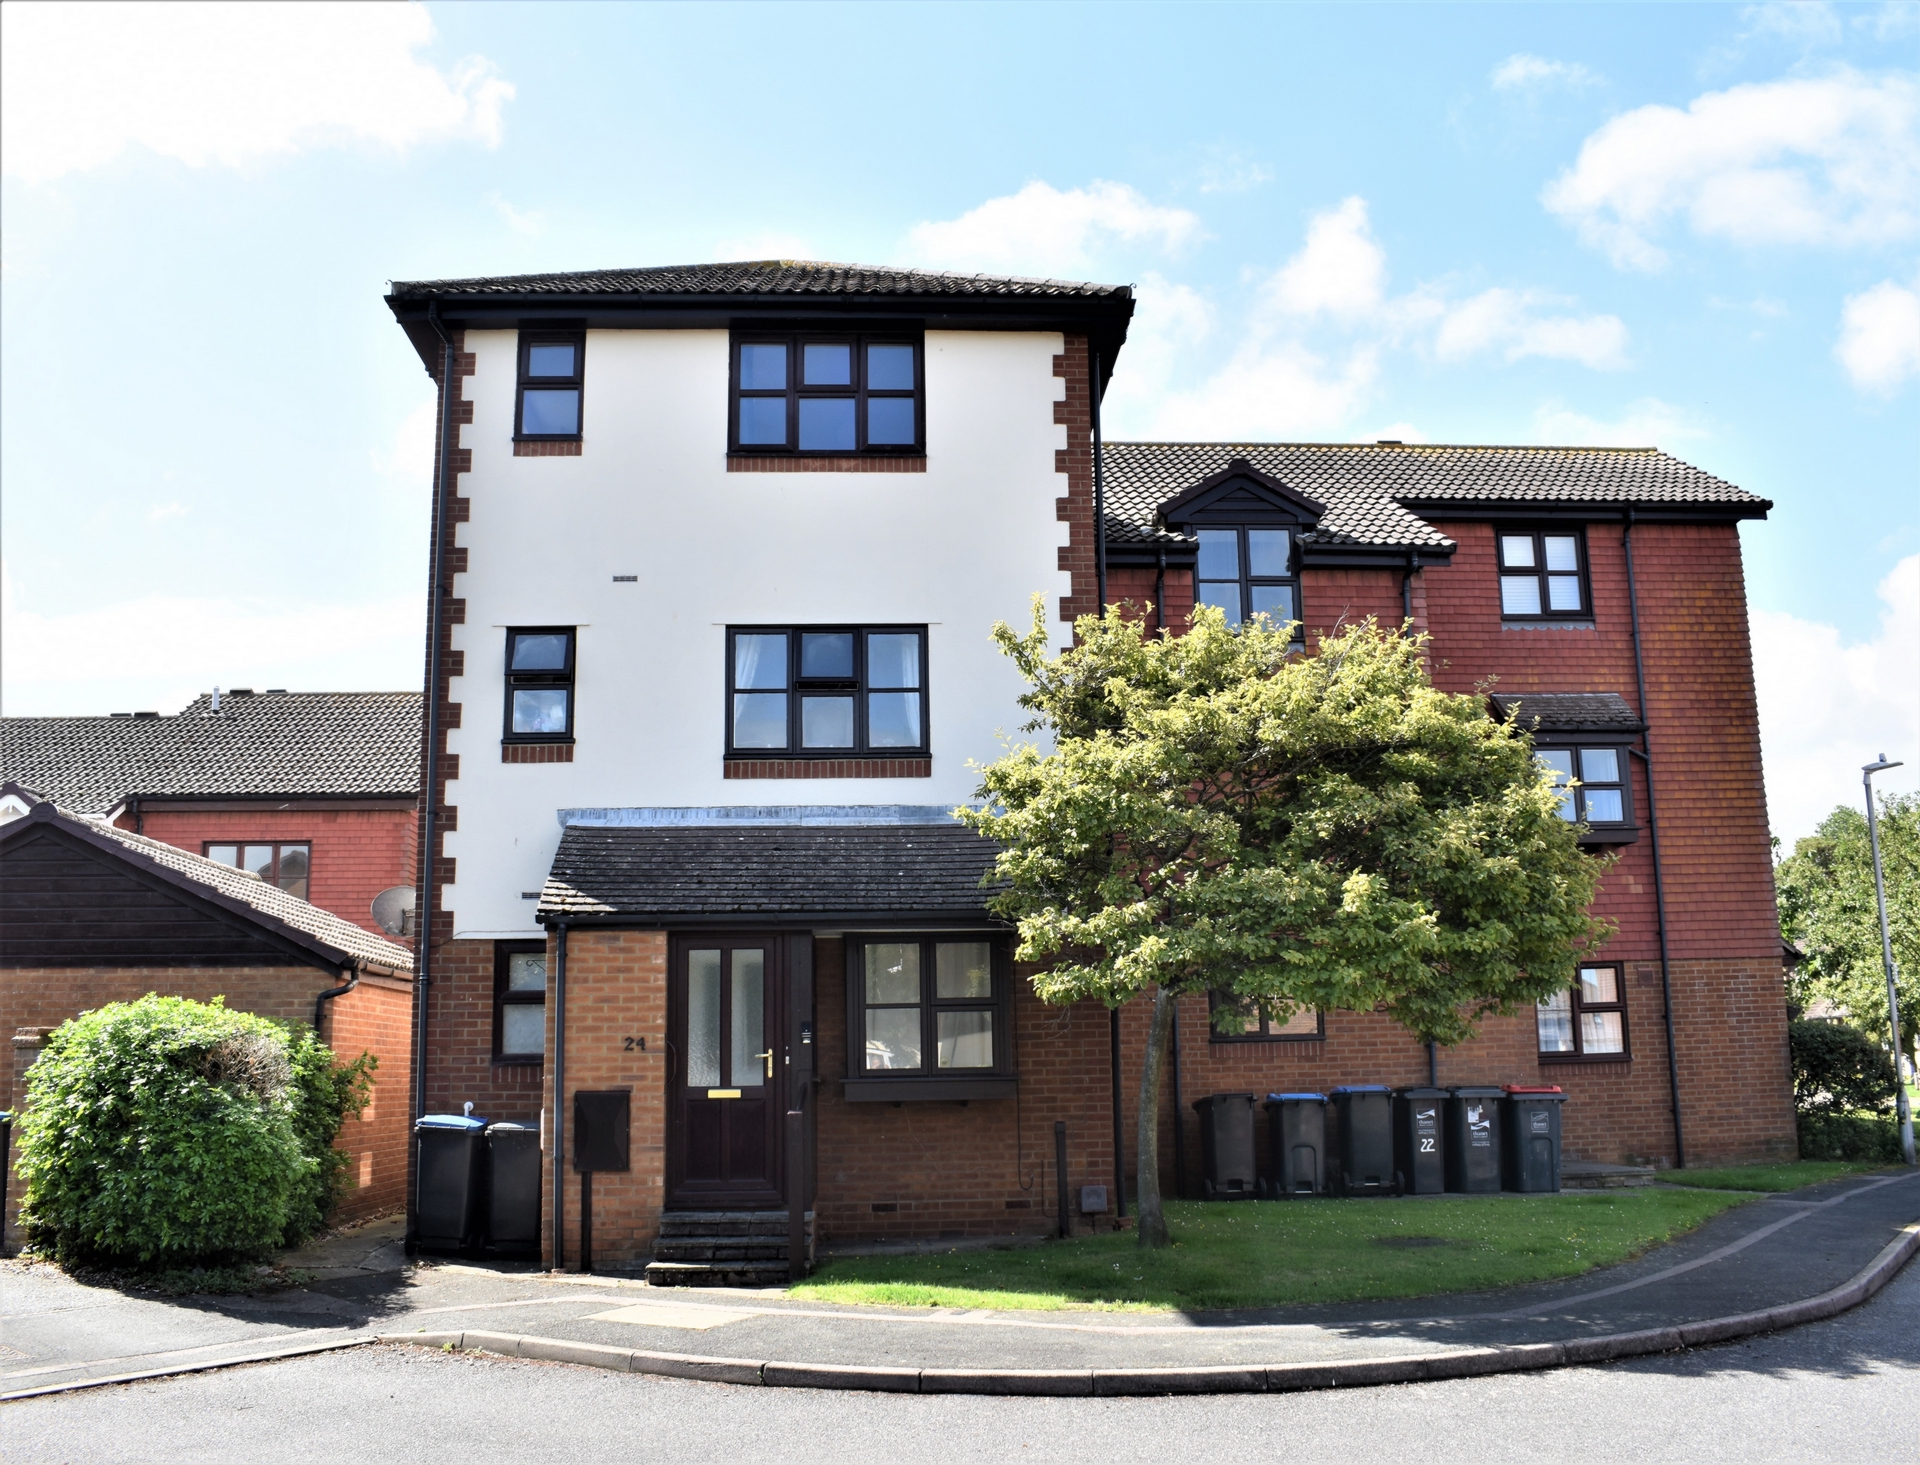 GREAT INVESTMENT OPPORTUNITY - This property has just been fully redecorated and new carpets fitted throughout.   Large One bedroom top floor flat with a tenant in situ. - Located within the ever popular and peaceful cul-de-sac of Brandon Way, Birchington.